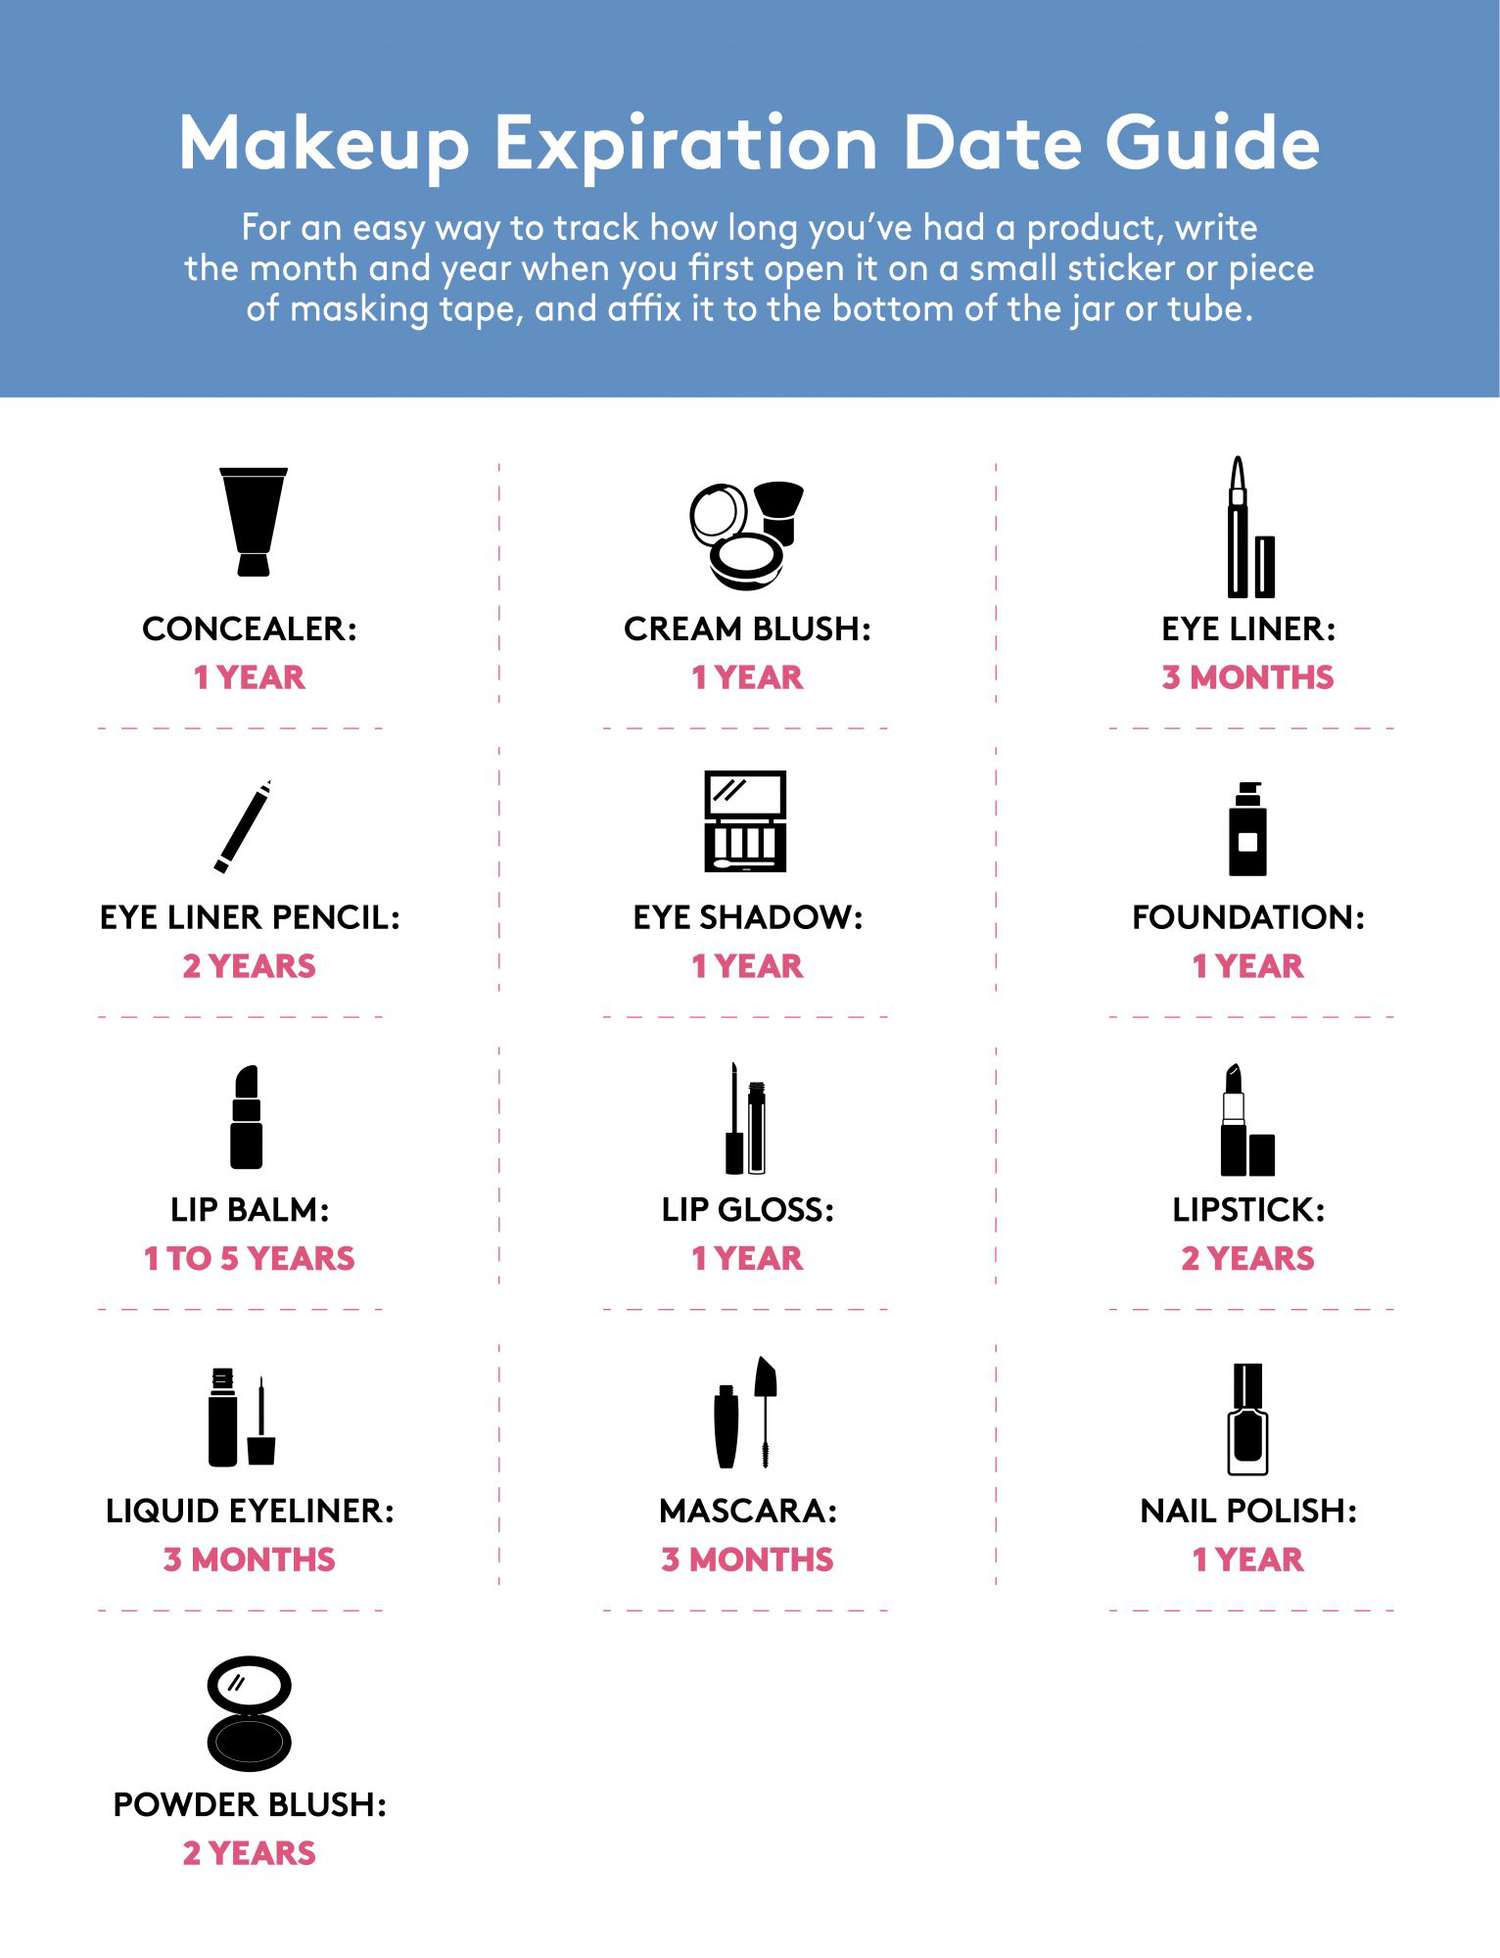 Makeup expiration dates chart - chart and dates for makeup expiration (mascara, eye liner, foundation, and more) and more)